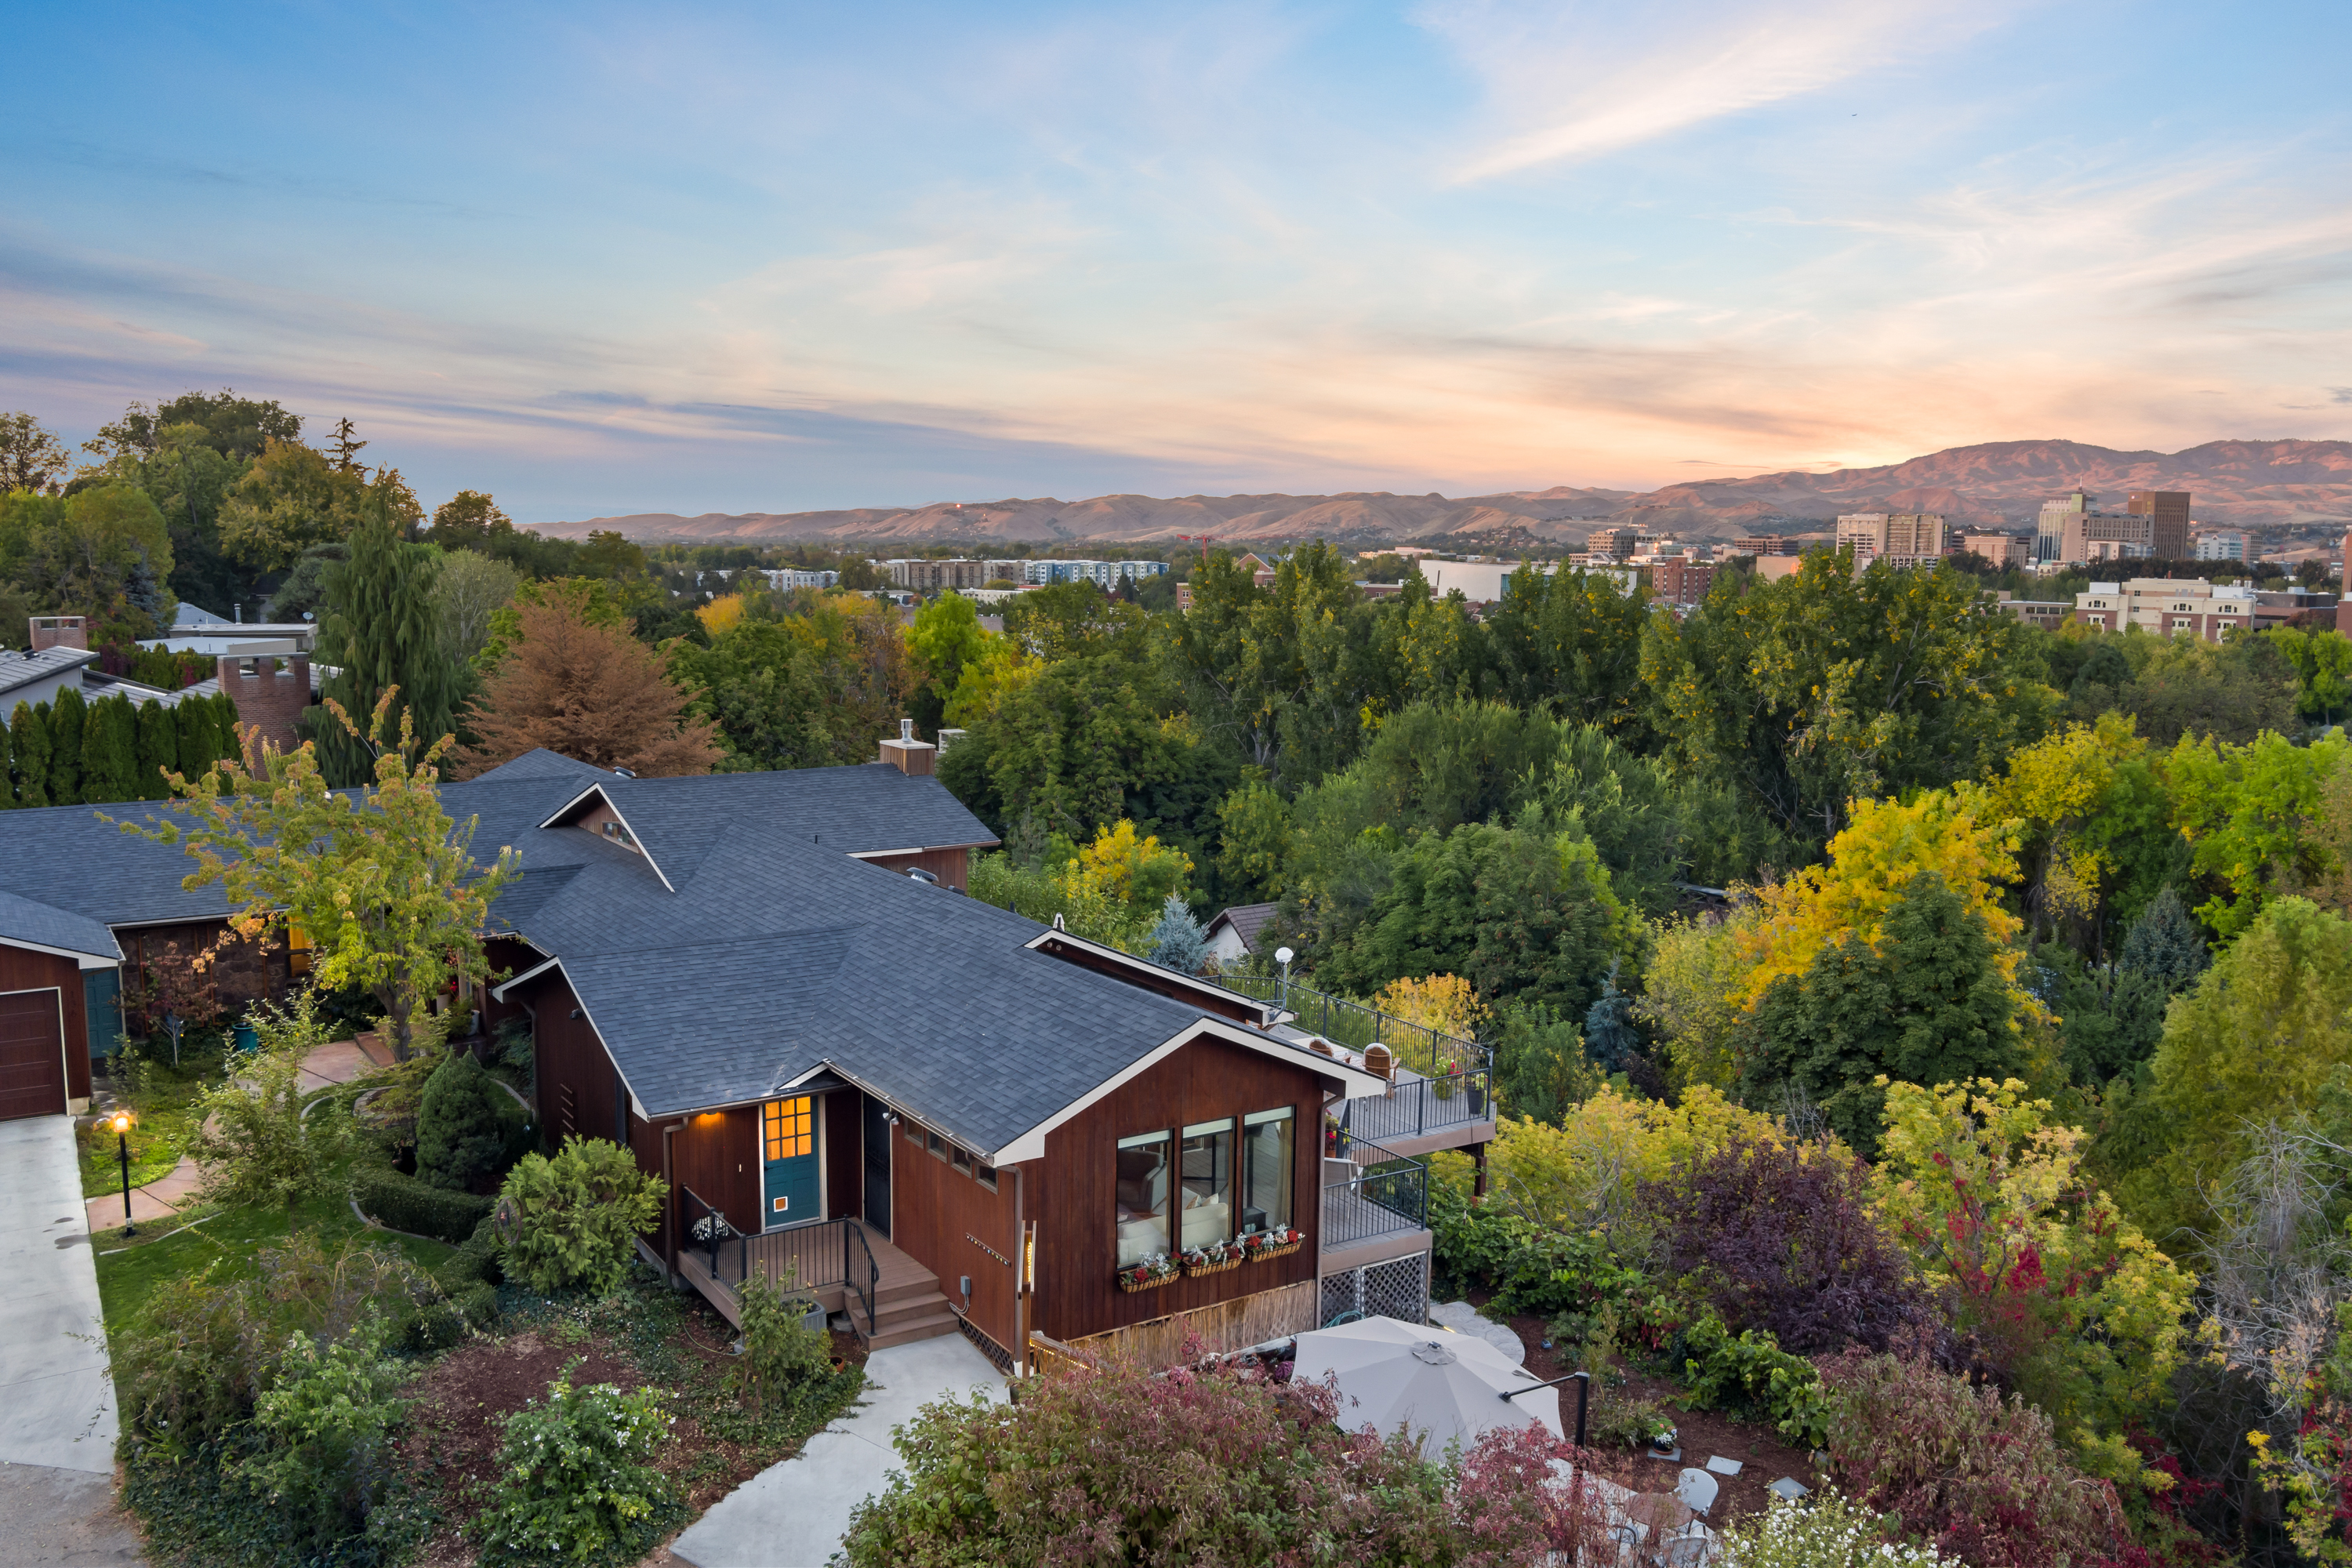 We share 9 quick takeaways about Boise’s current real estate market for home buyers and home sellers.